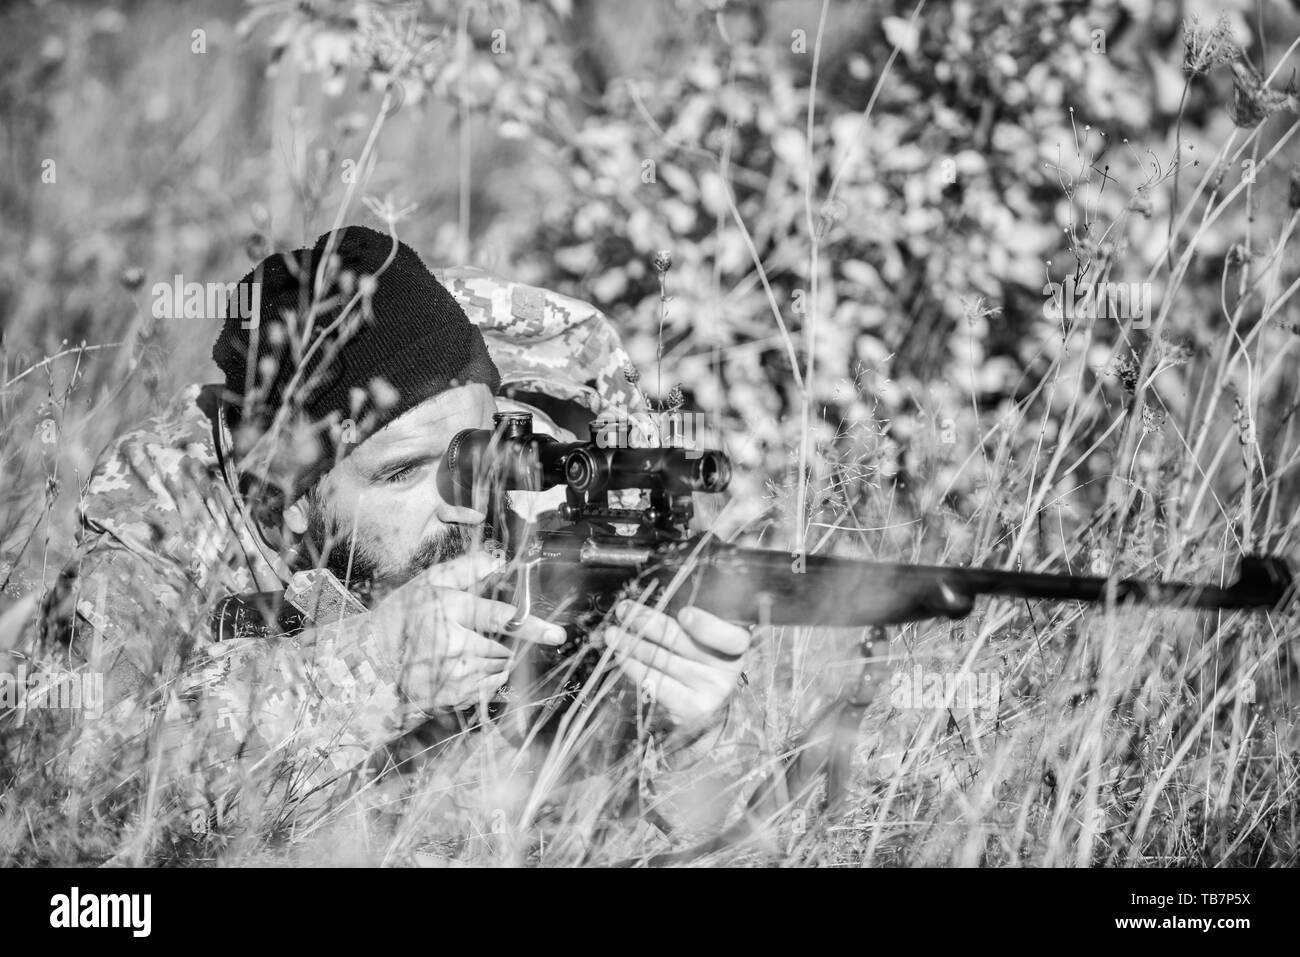 Bearded man hunter. Military uniform fashion. Army forces. Camouflage. Hunting skills and weapon equipment. How turn hunting into hobby. Man hunter with rifle gun. Boot camp. Military action Stock Photo